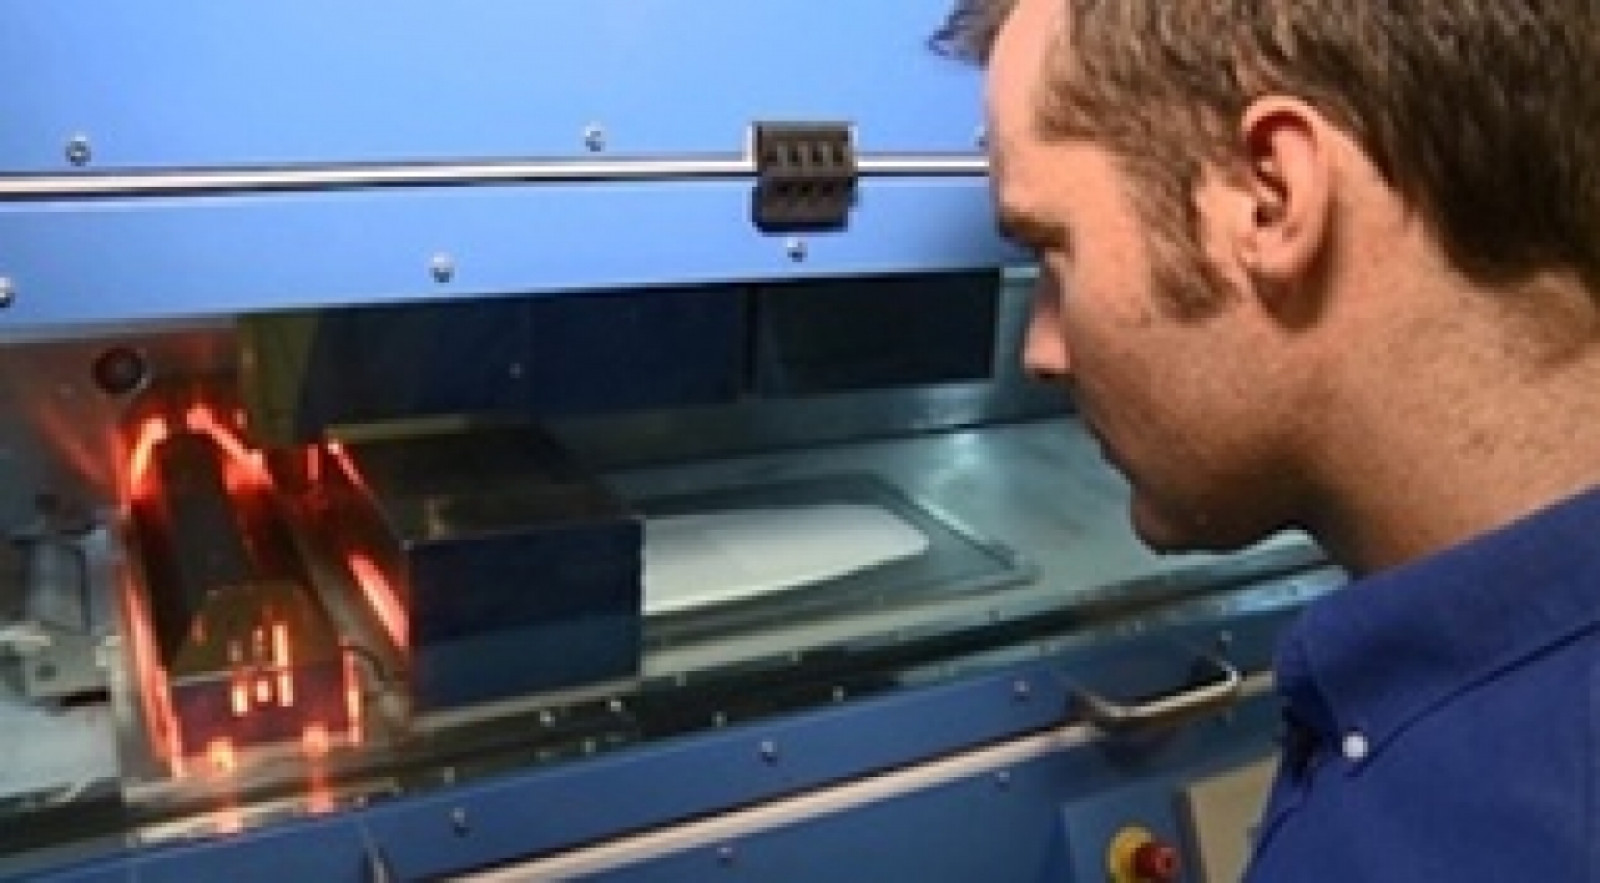 3D printer aims to challenge injection moulding on...